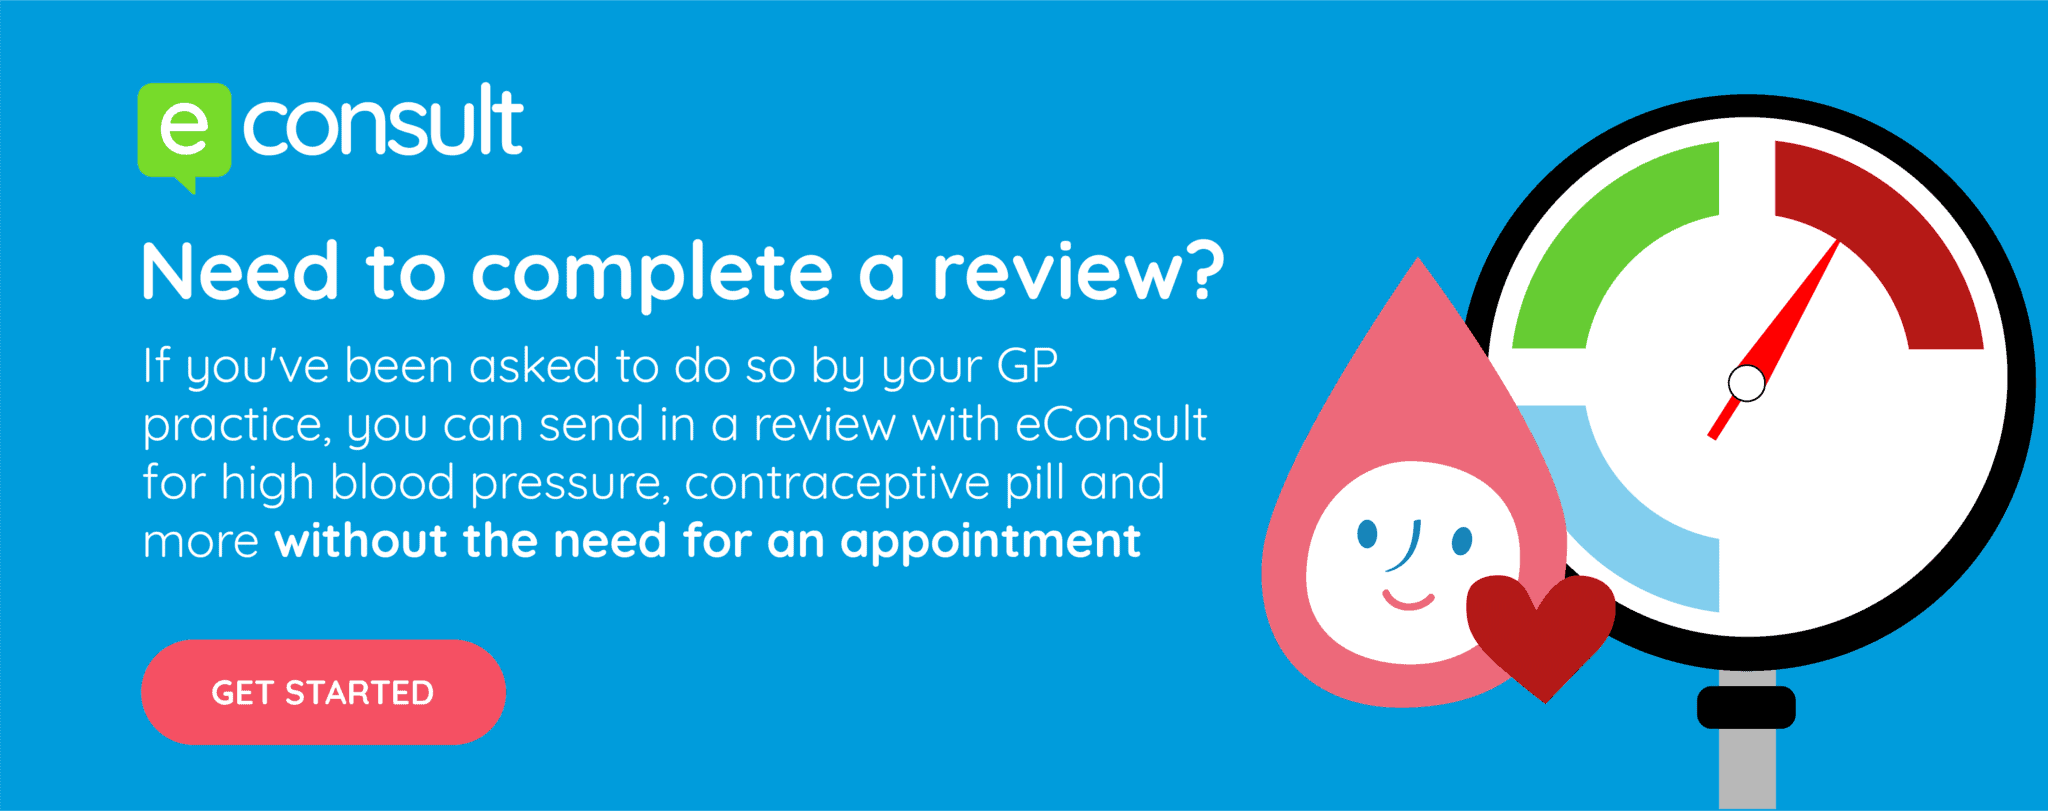 Complete a Health Review